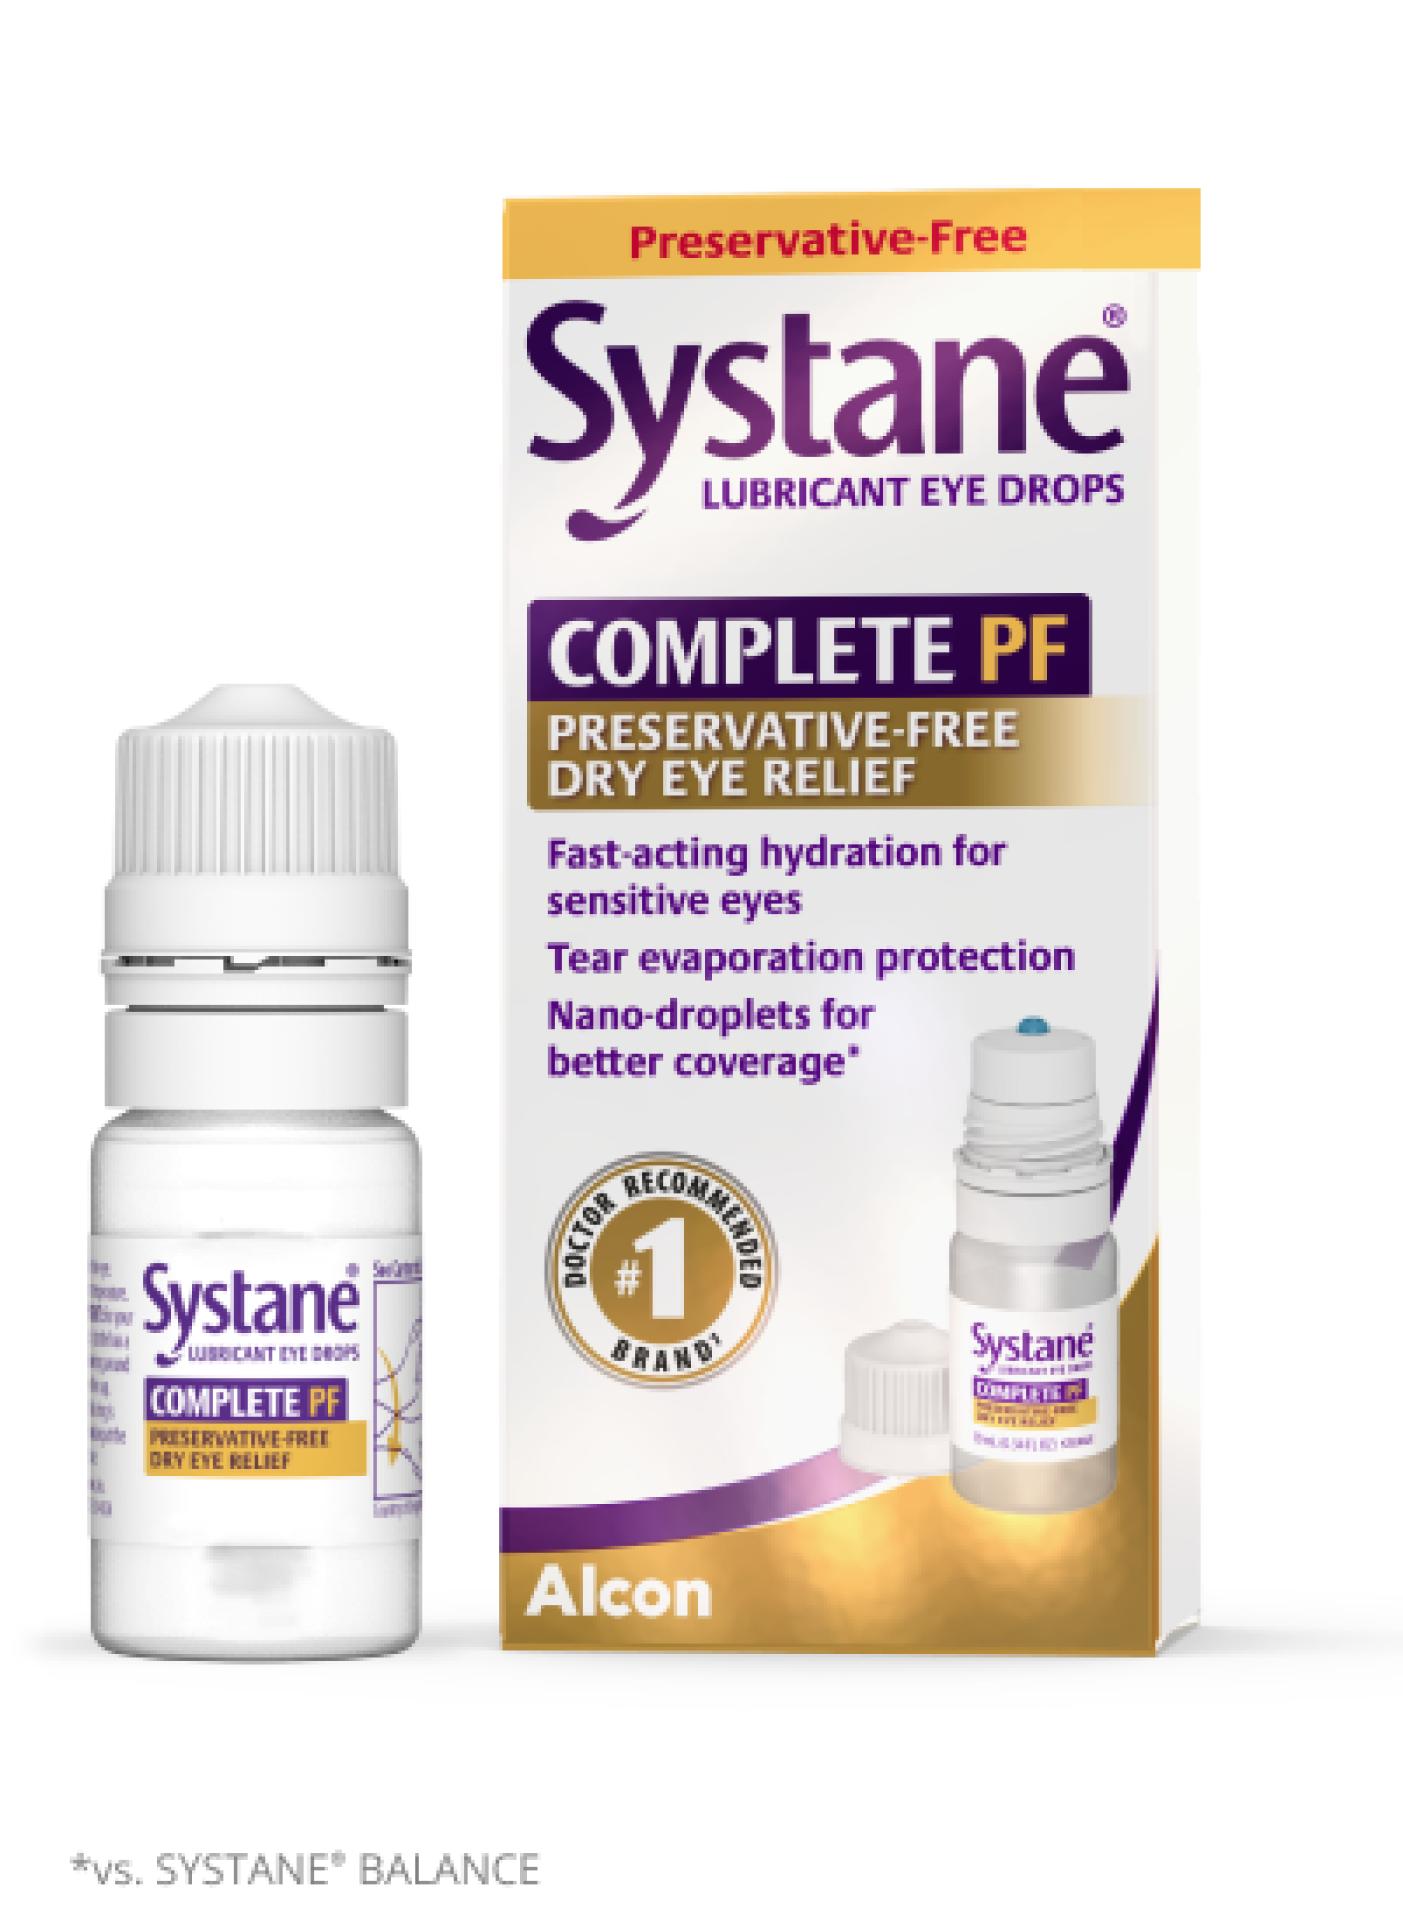 Systane Complete Preservative-free Lubricating Eye Drops multi-dose bottle and product box